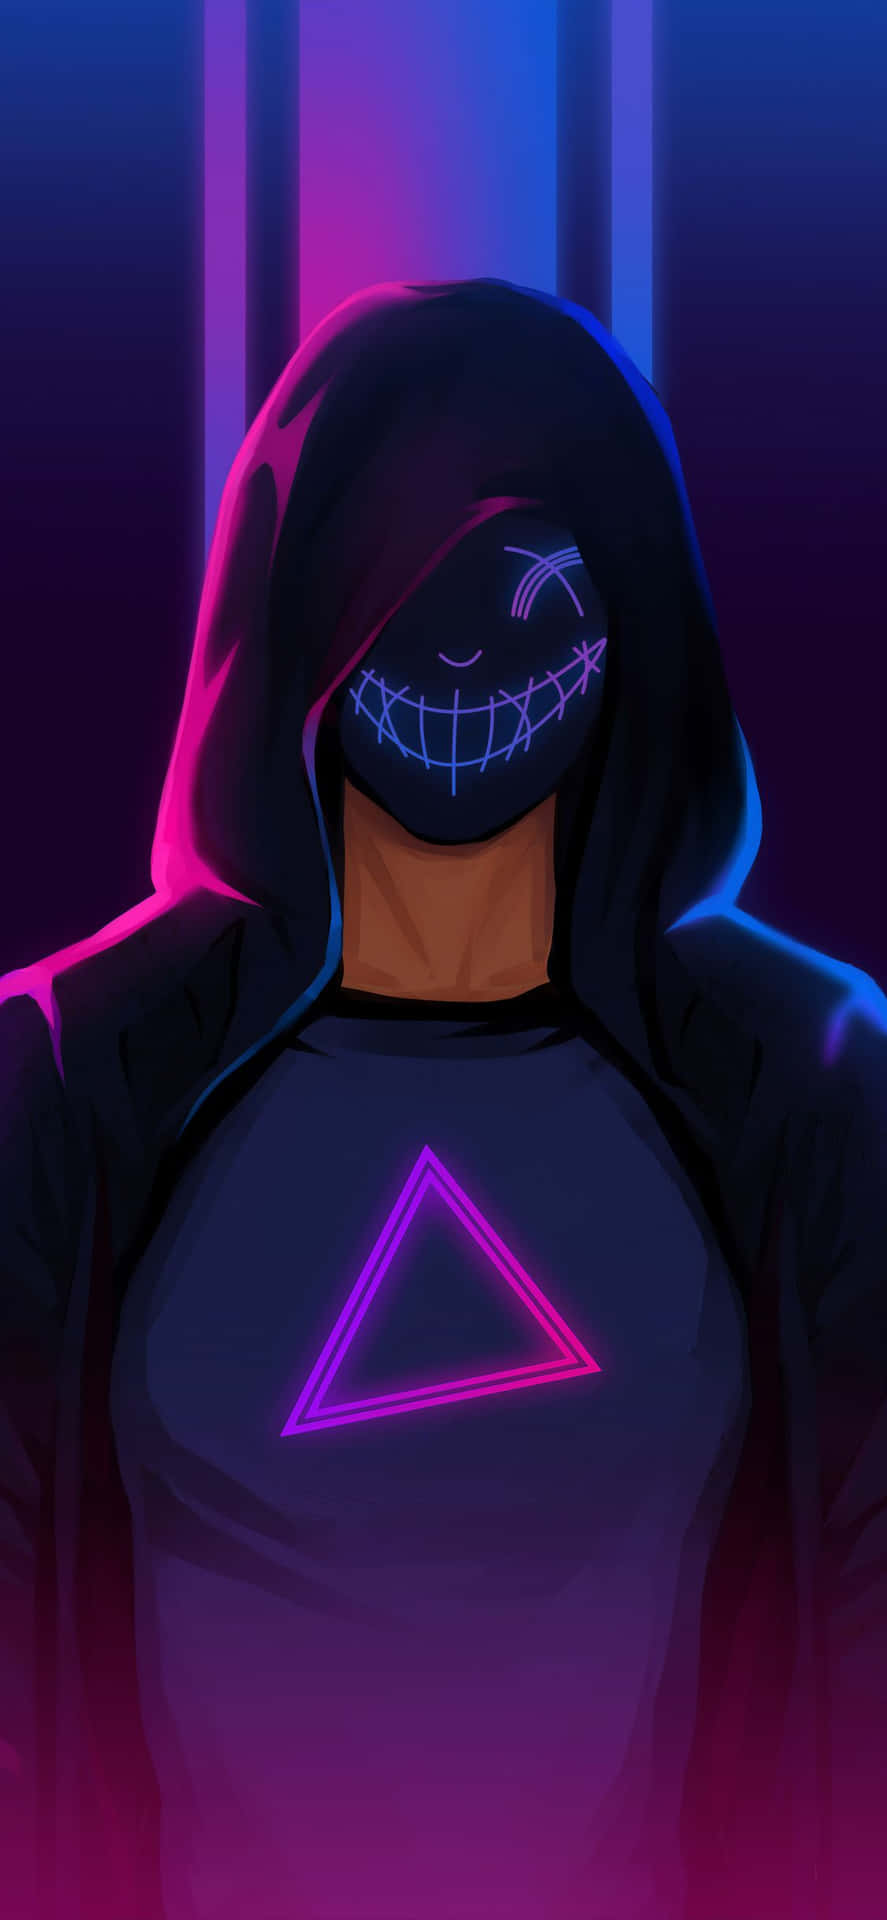 Anime Neon Boy With Mask Wallpaper